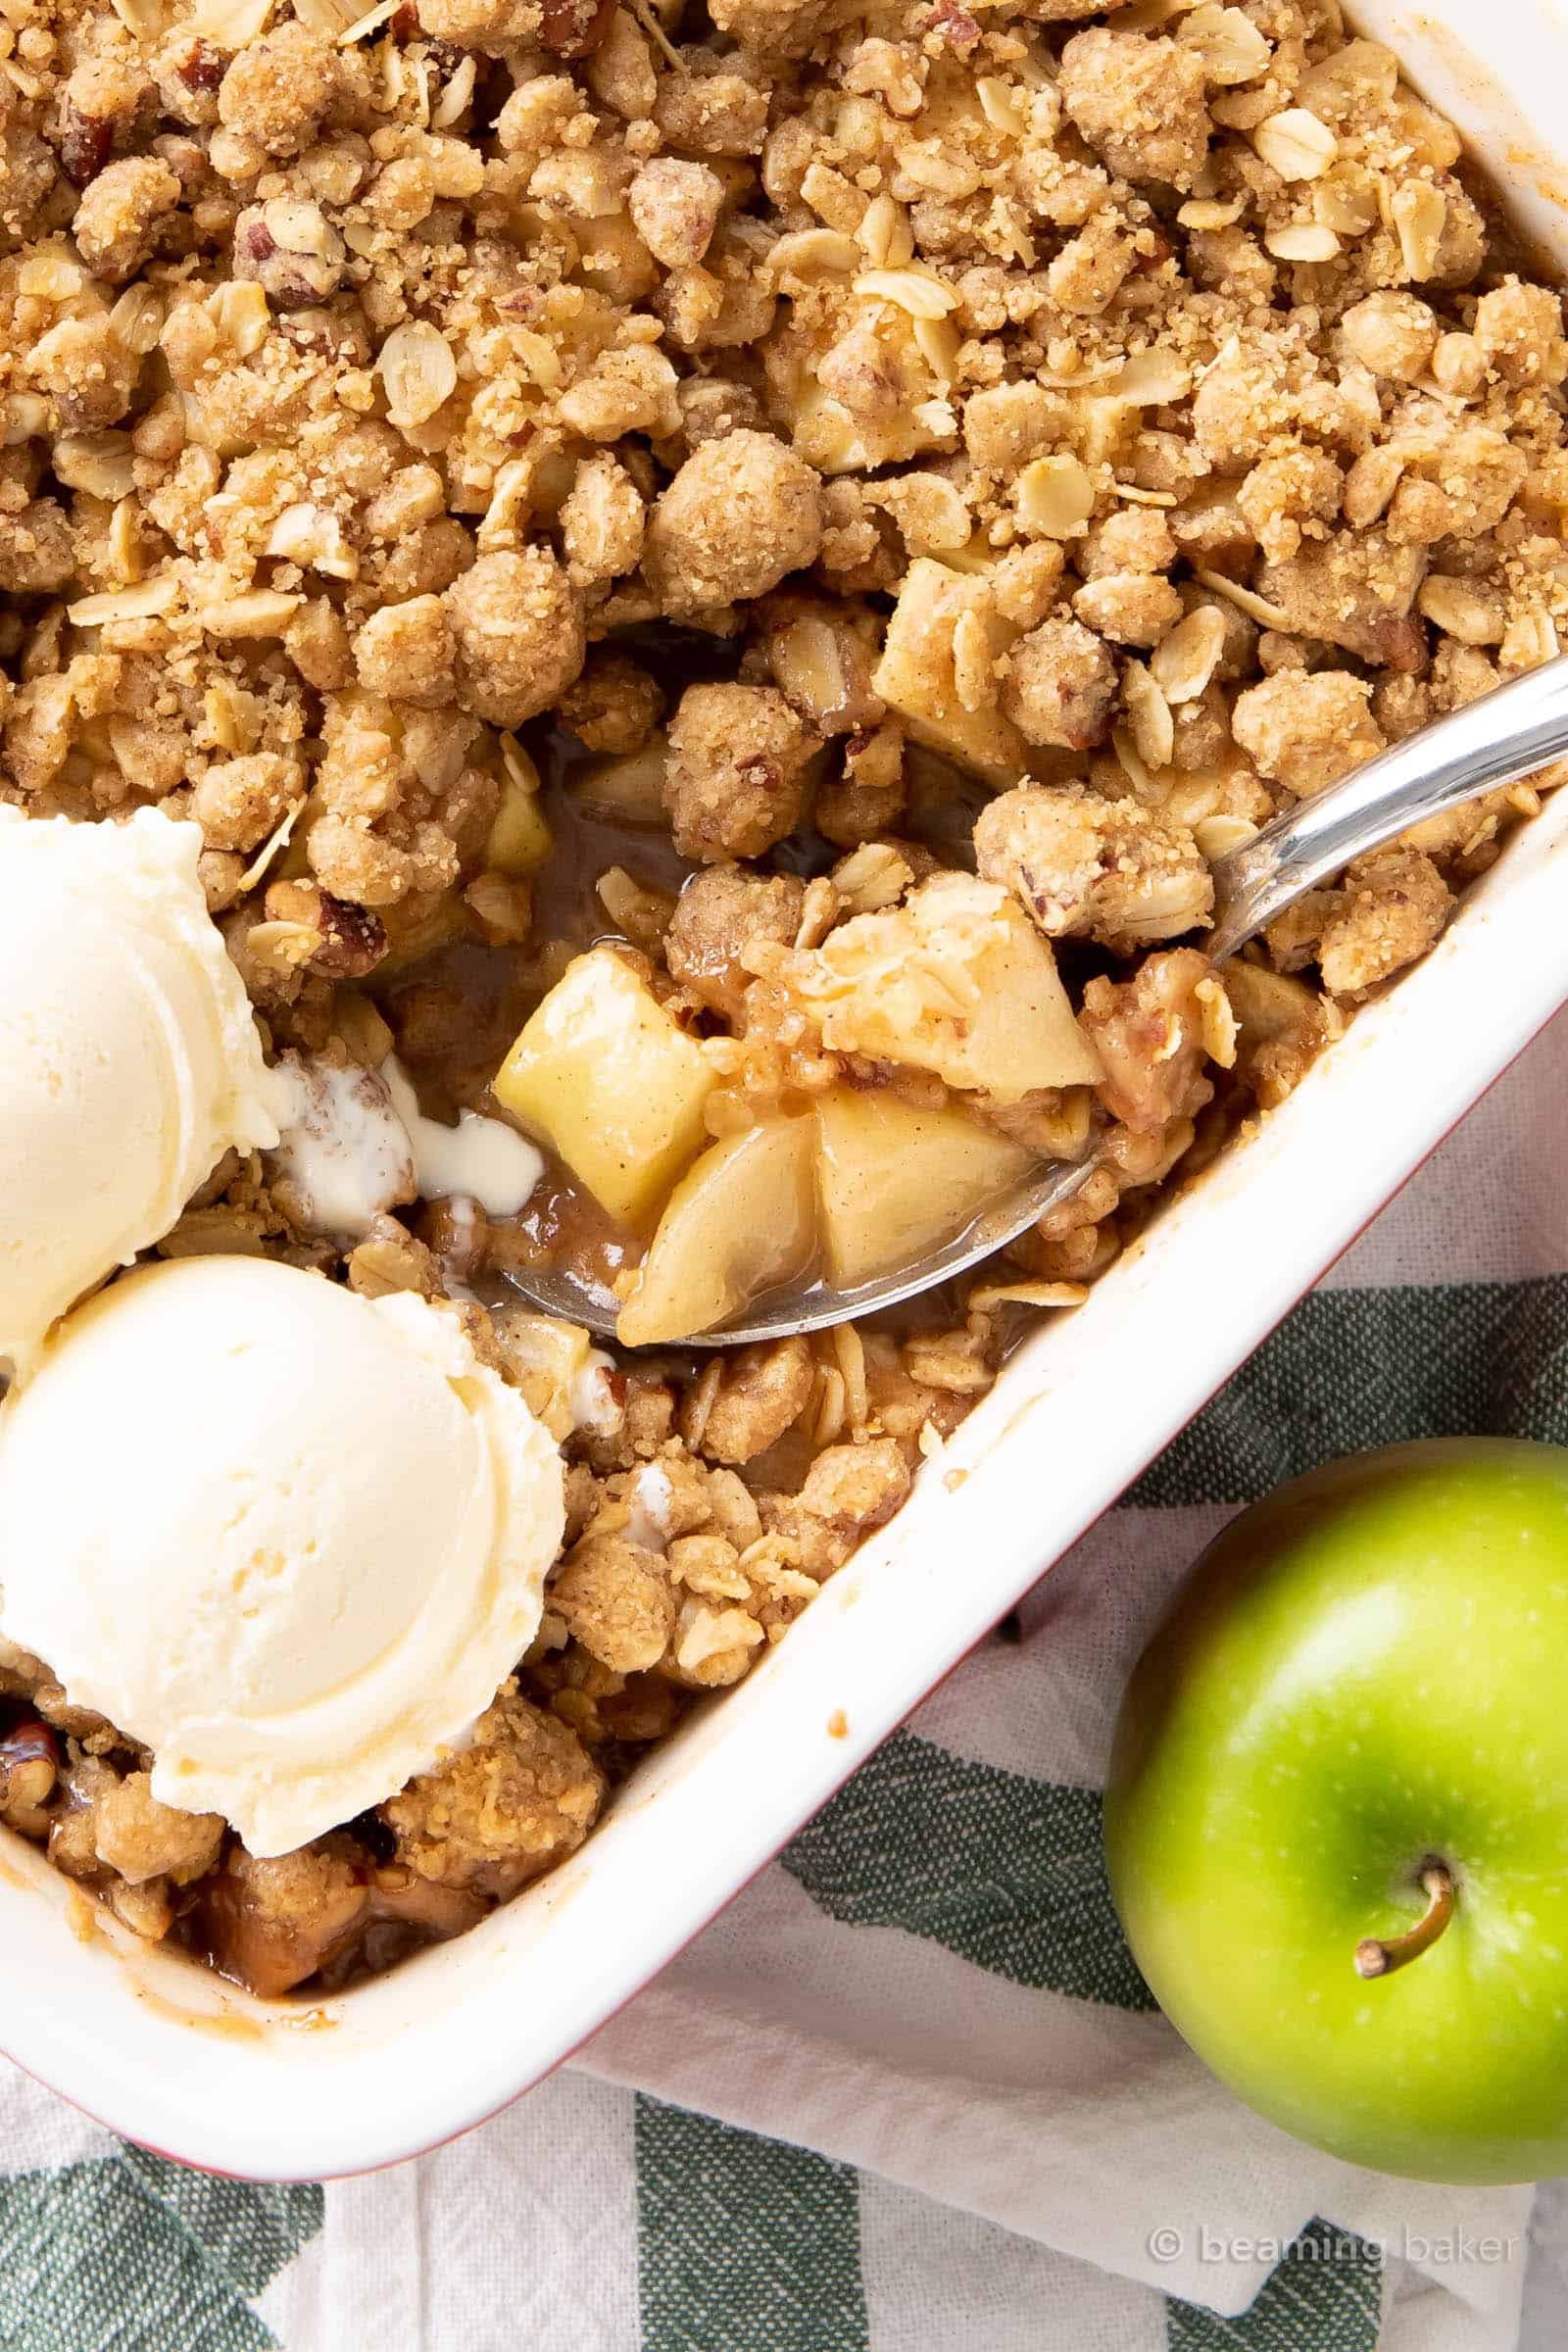 A silver spoon scooping up apple crumble from a baking dish with ice cream